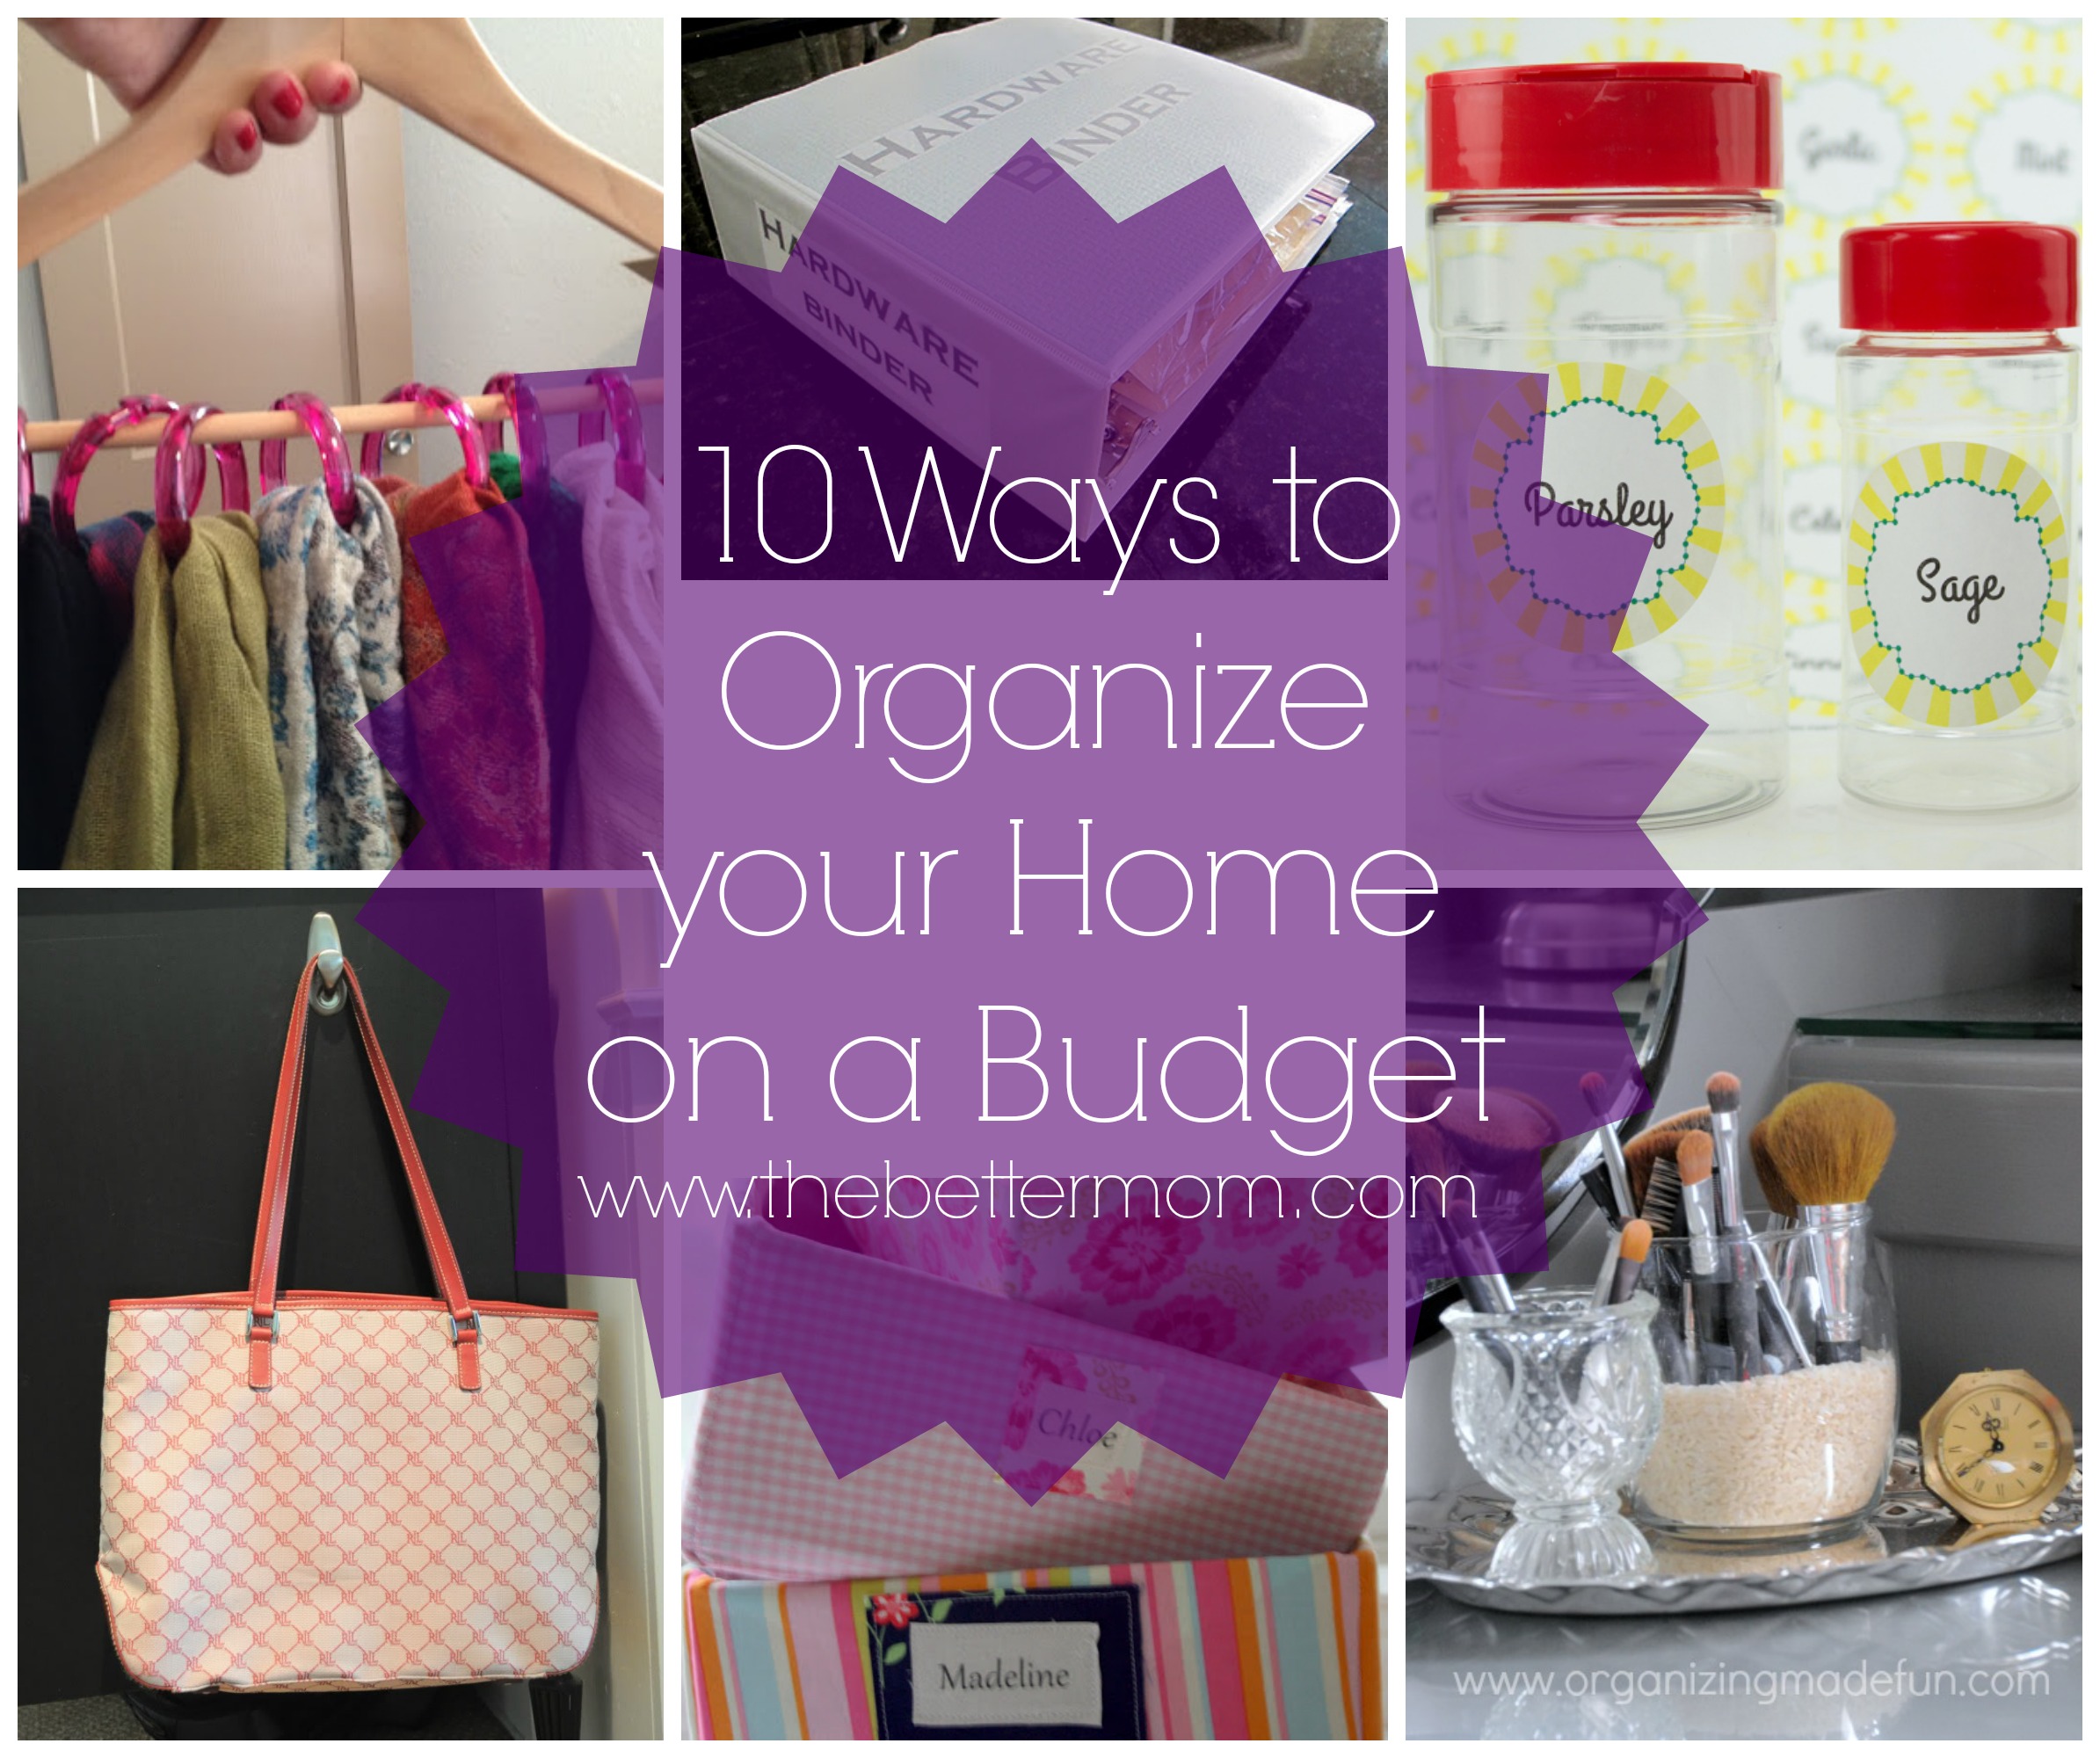 10 Ways to Organize your Home on a Budget — The Better Mom